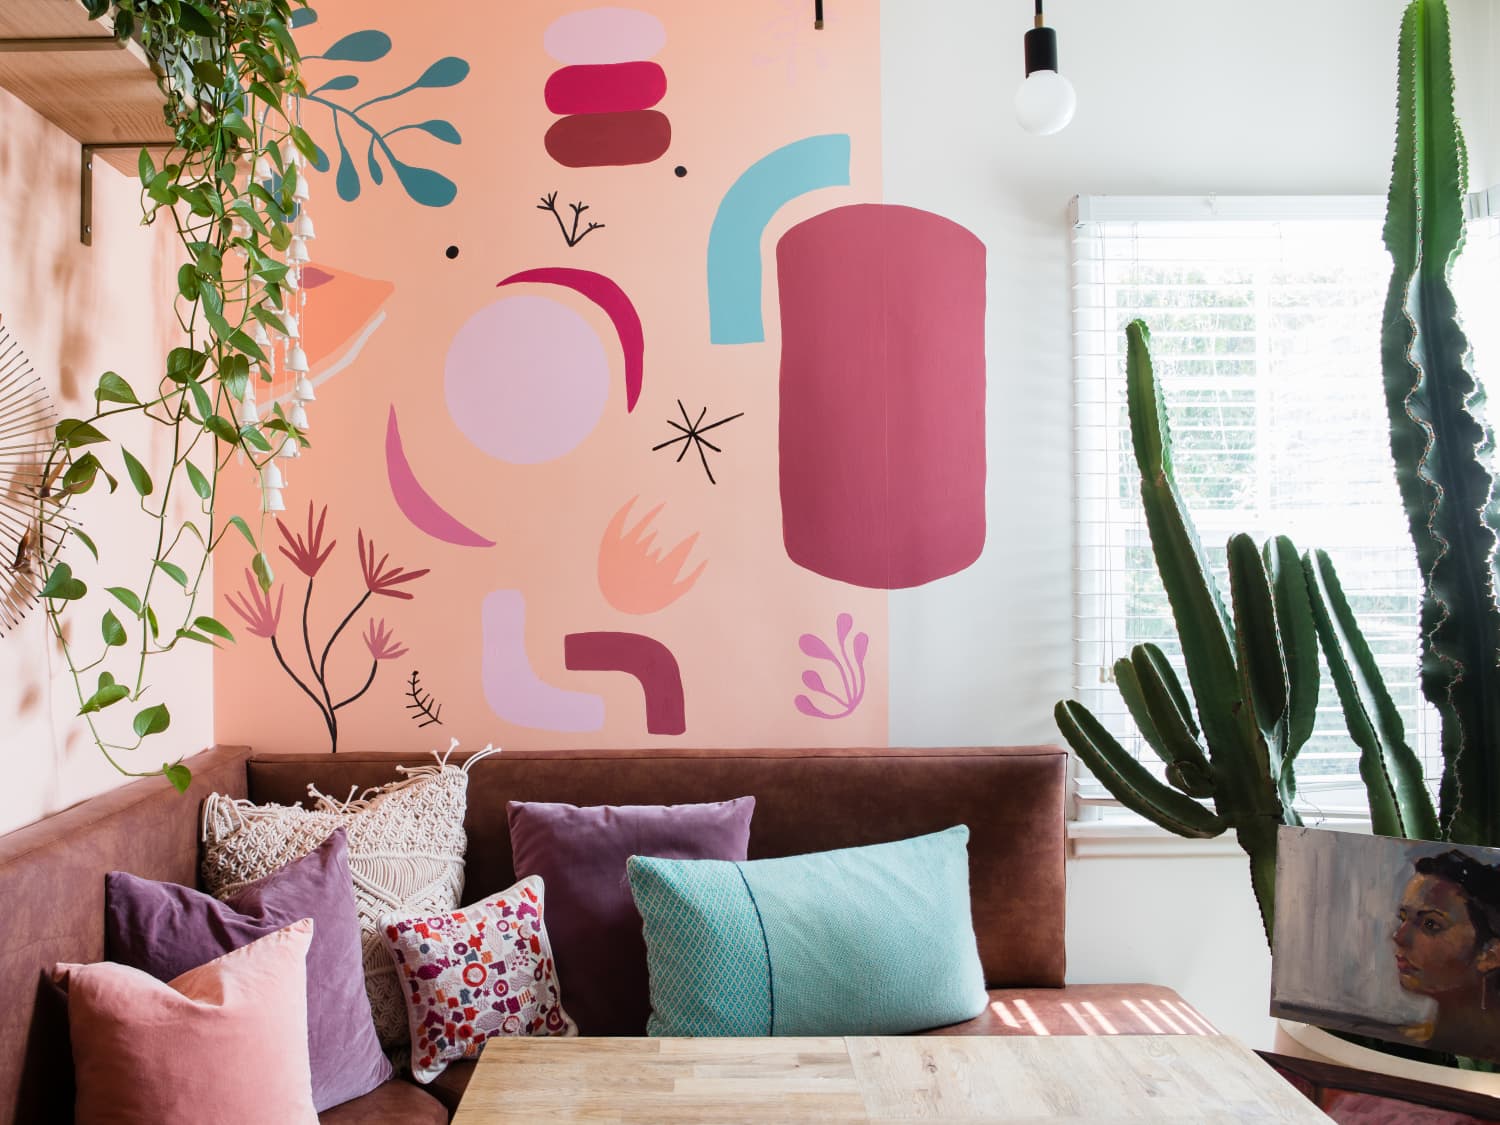 Easy-to-Install Wall Murals to Hang In Your Home | Apartment Therapy